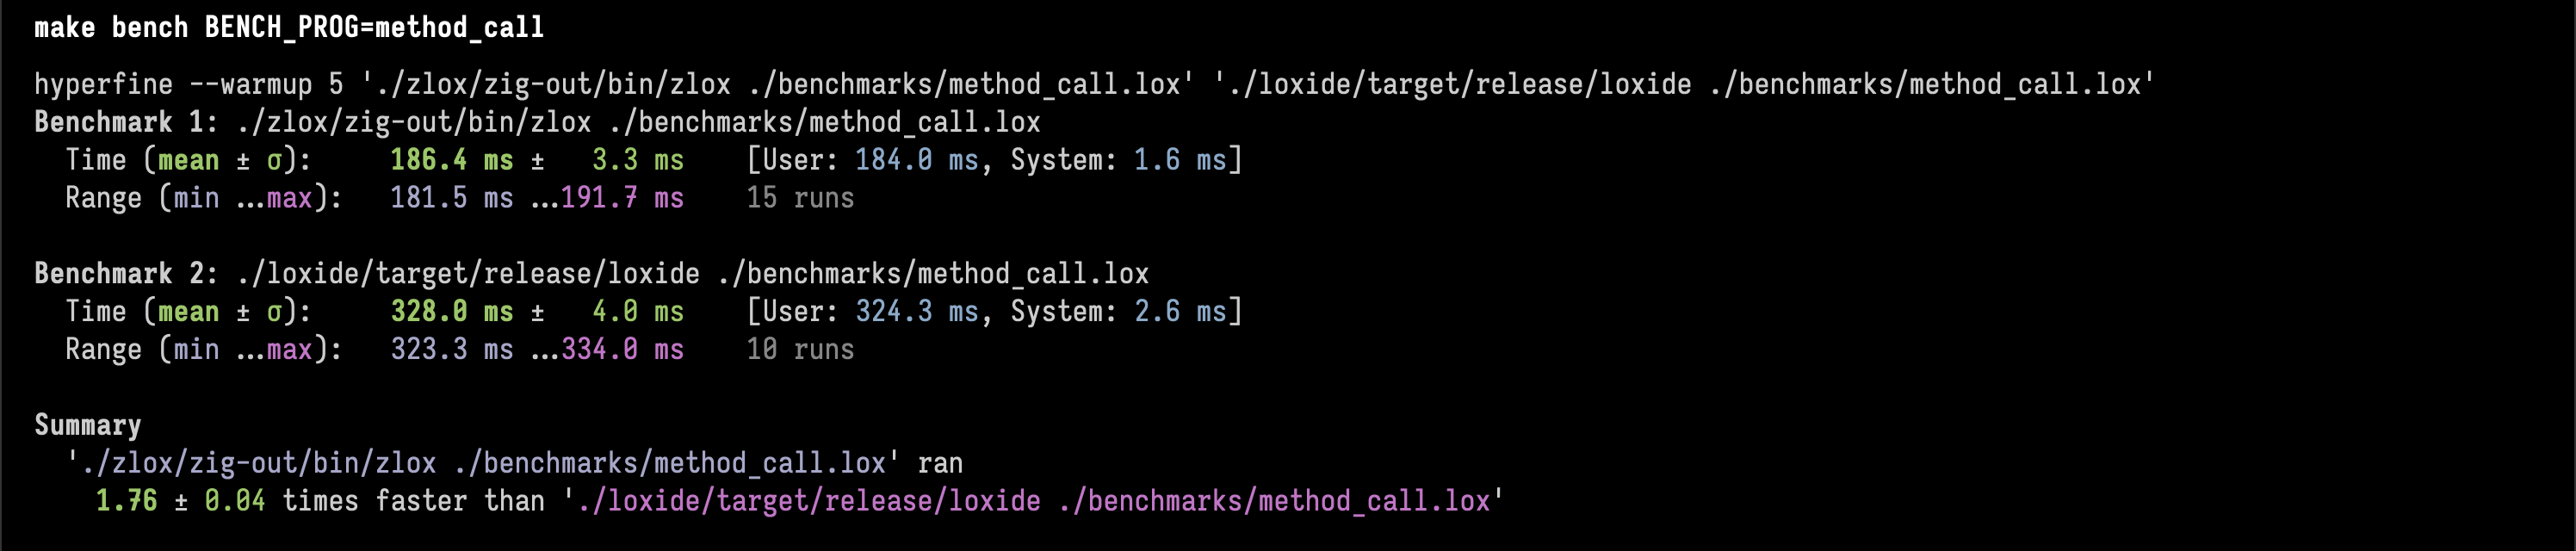 Stress testing the instance method calling